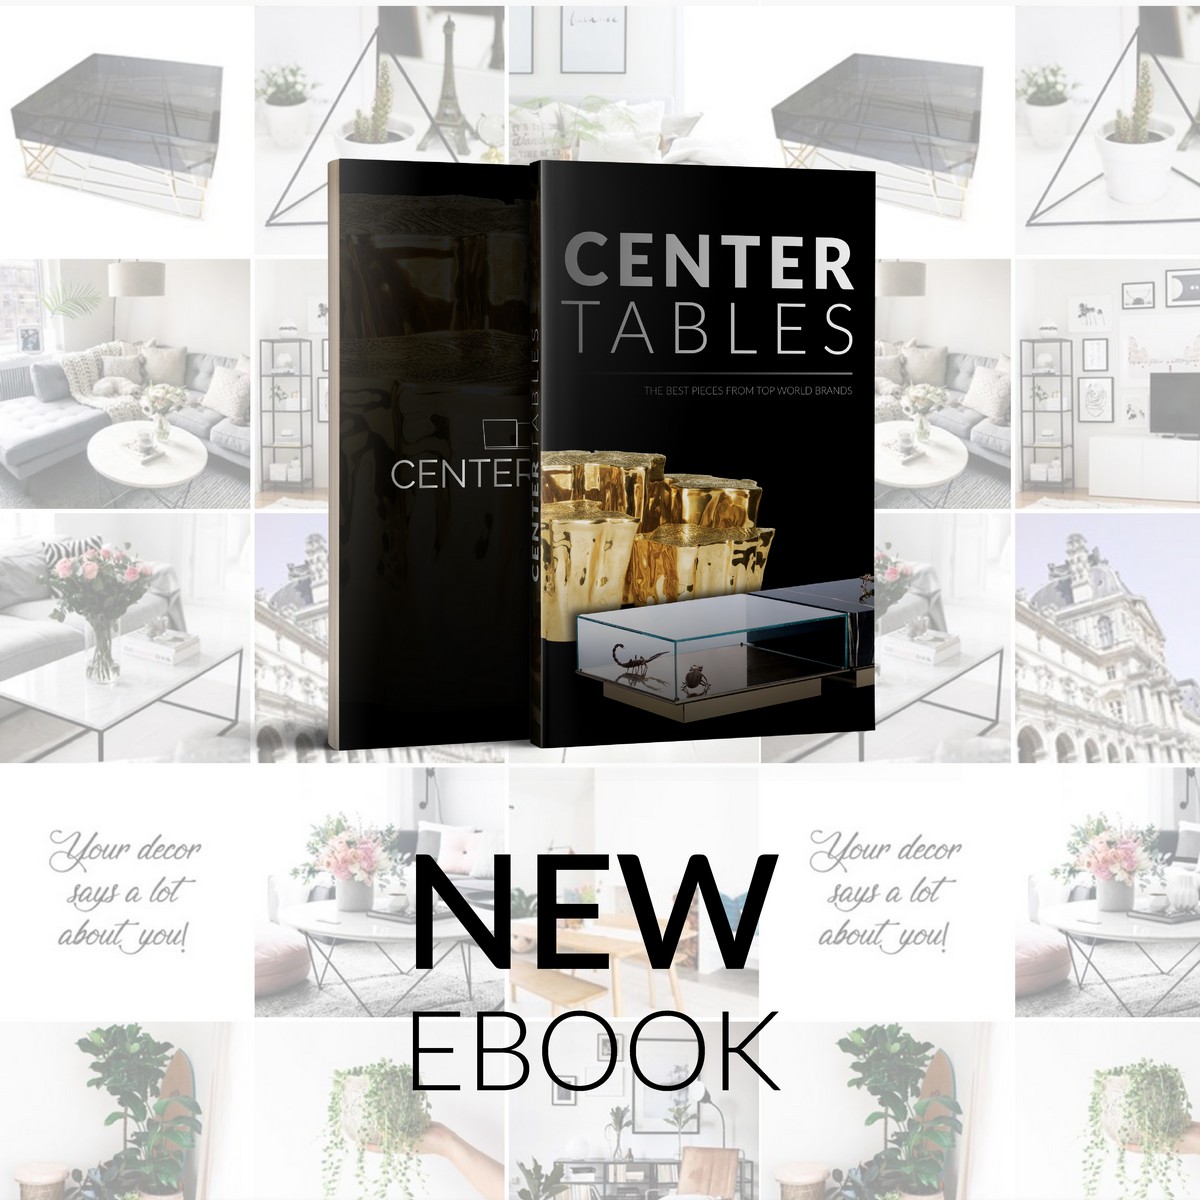 FREE EBOOK: The Best Center Tables Inspirations For Your Home Decor | This pieces come in a wide range of sizes, styles, materials, colors and even function, and sometimes it gets hard to decide which one will look better in our living room next to our furniture. #centertables #homeinteriors #centertablesblog #homedecor #interiordesign